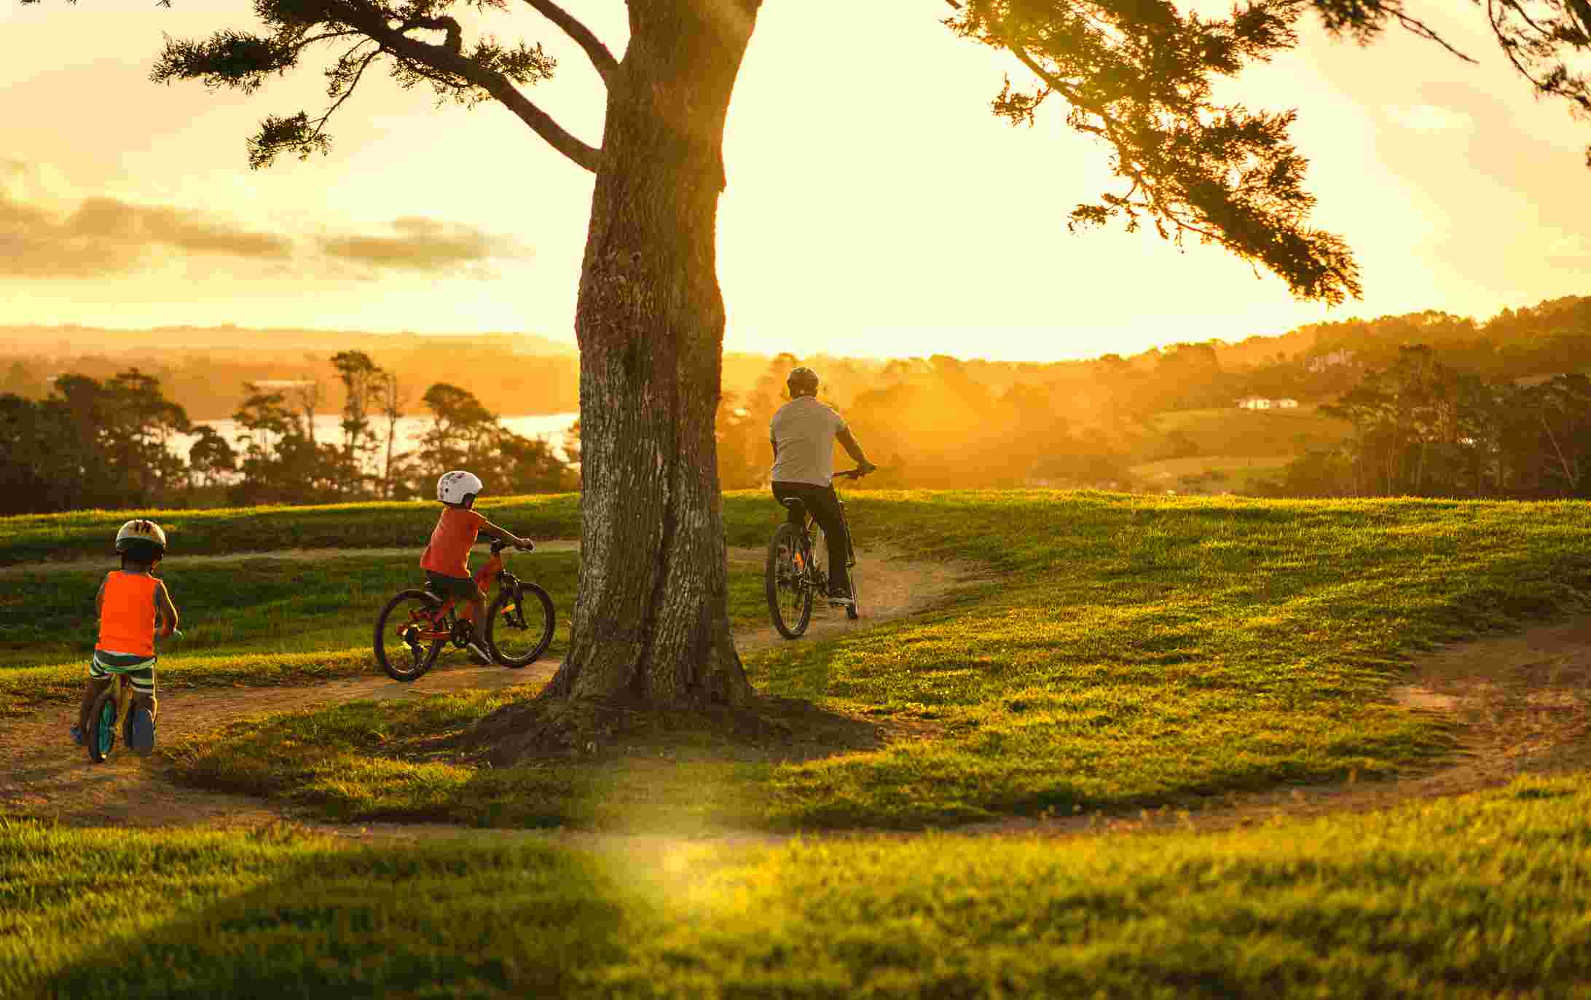 Enjoying outdoors during sunset while riding bike on a track, Cornwall Park, Auckland, New Zealand